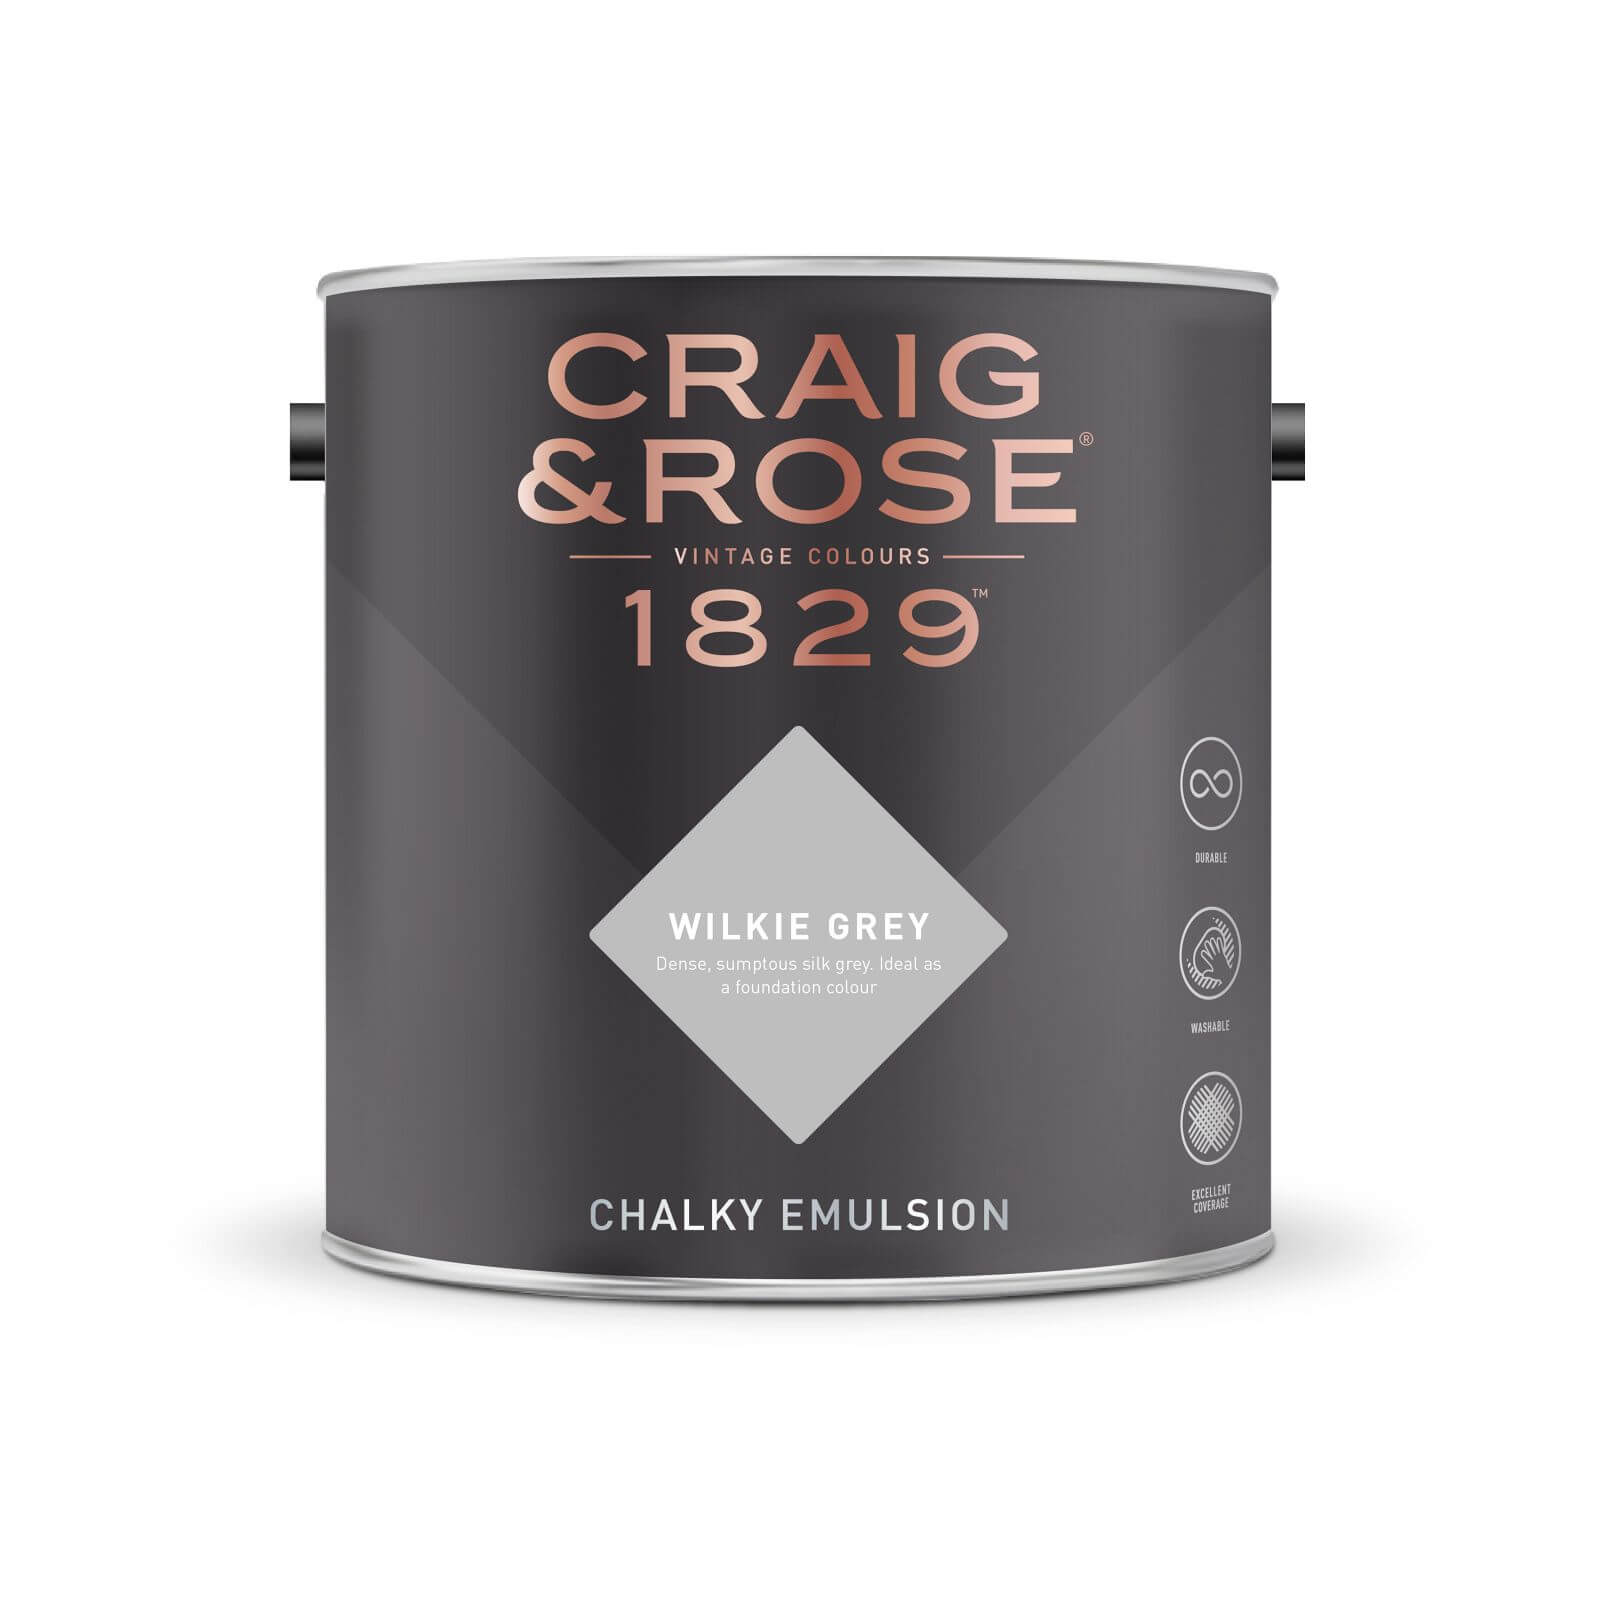 Craig & Rose 1829 Chalky Emulsion Paint Wilkie Grey - Tester 50ml